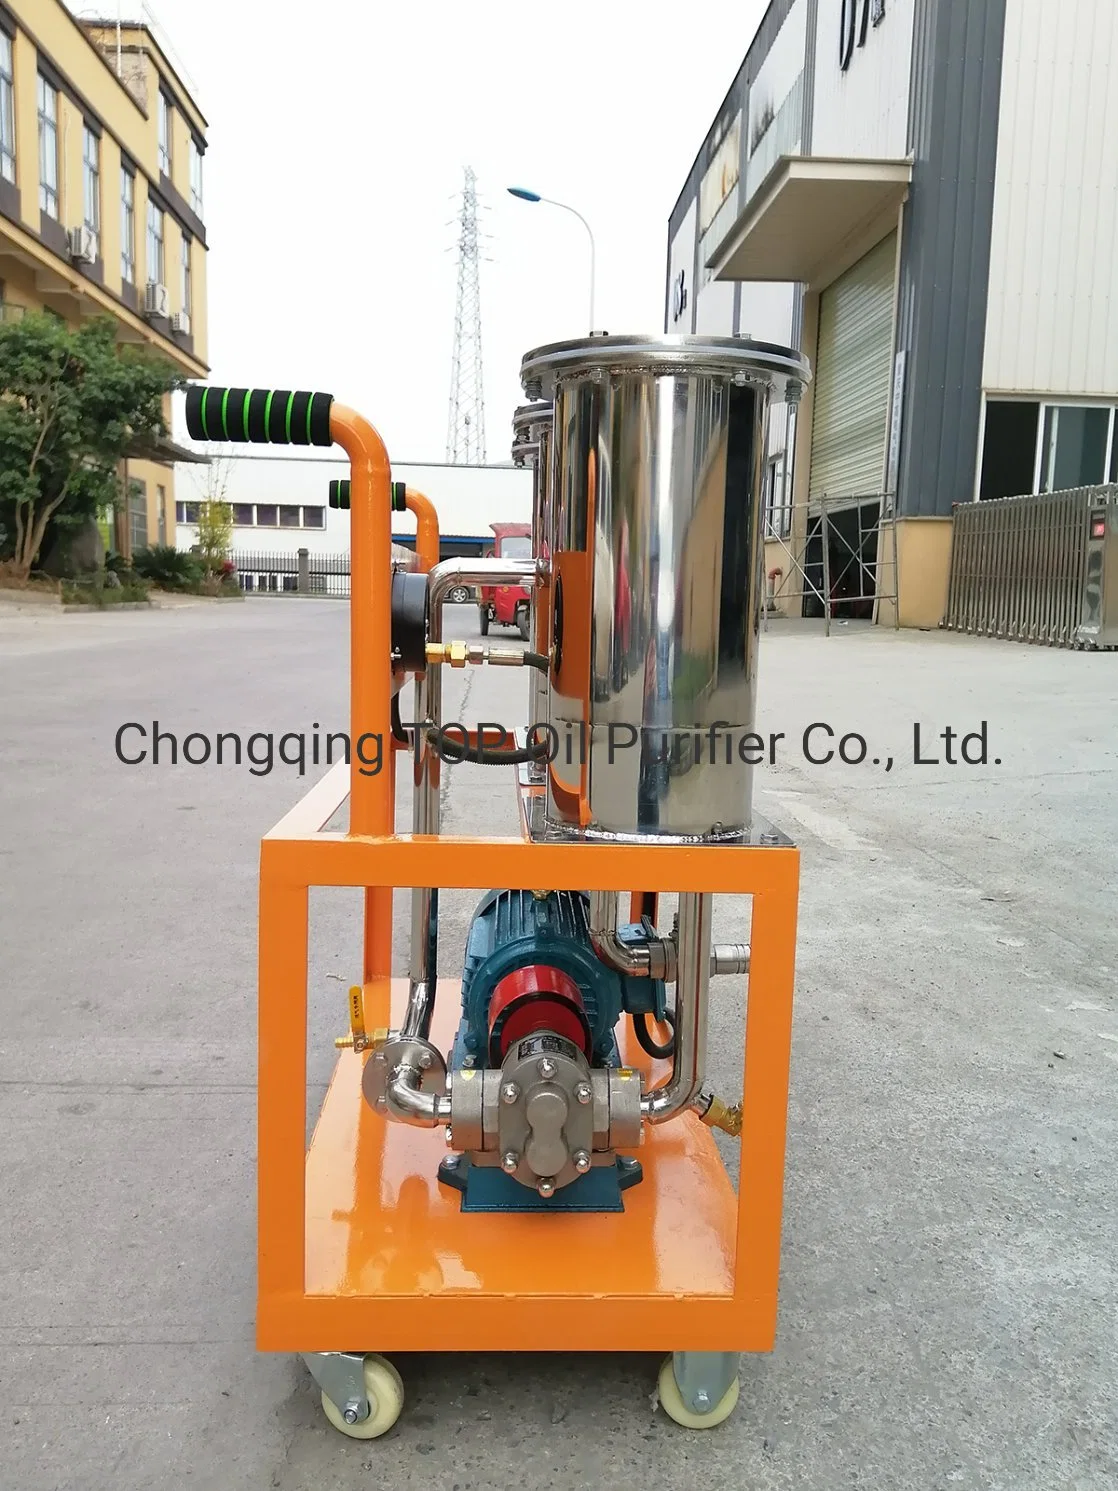 Factory Price Small Size Oil Treatment Machine for Impurities Removal